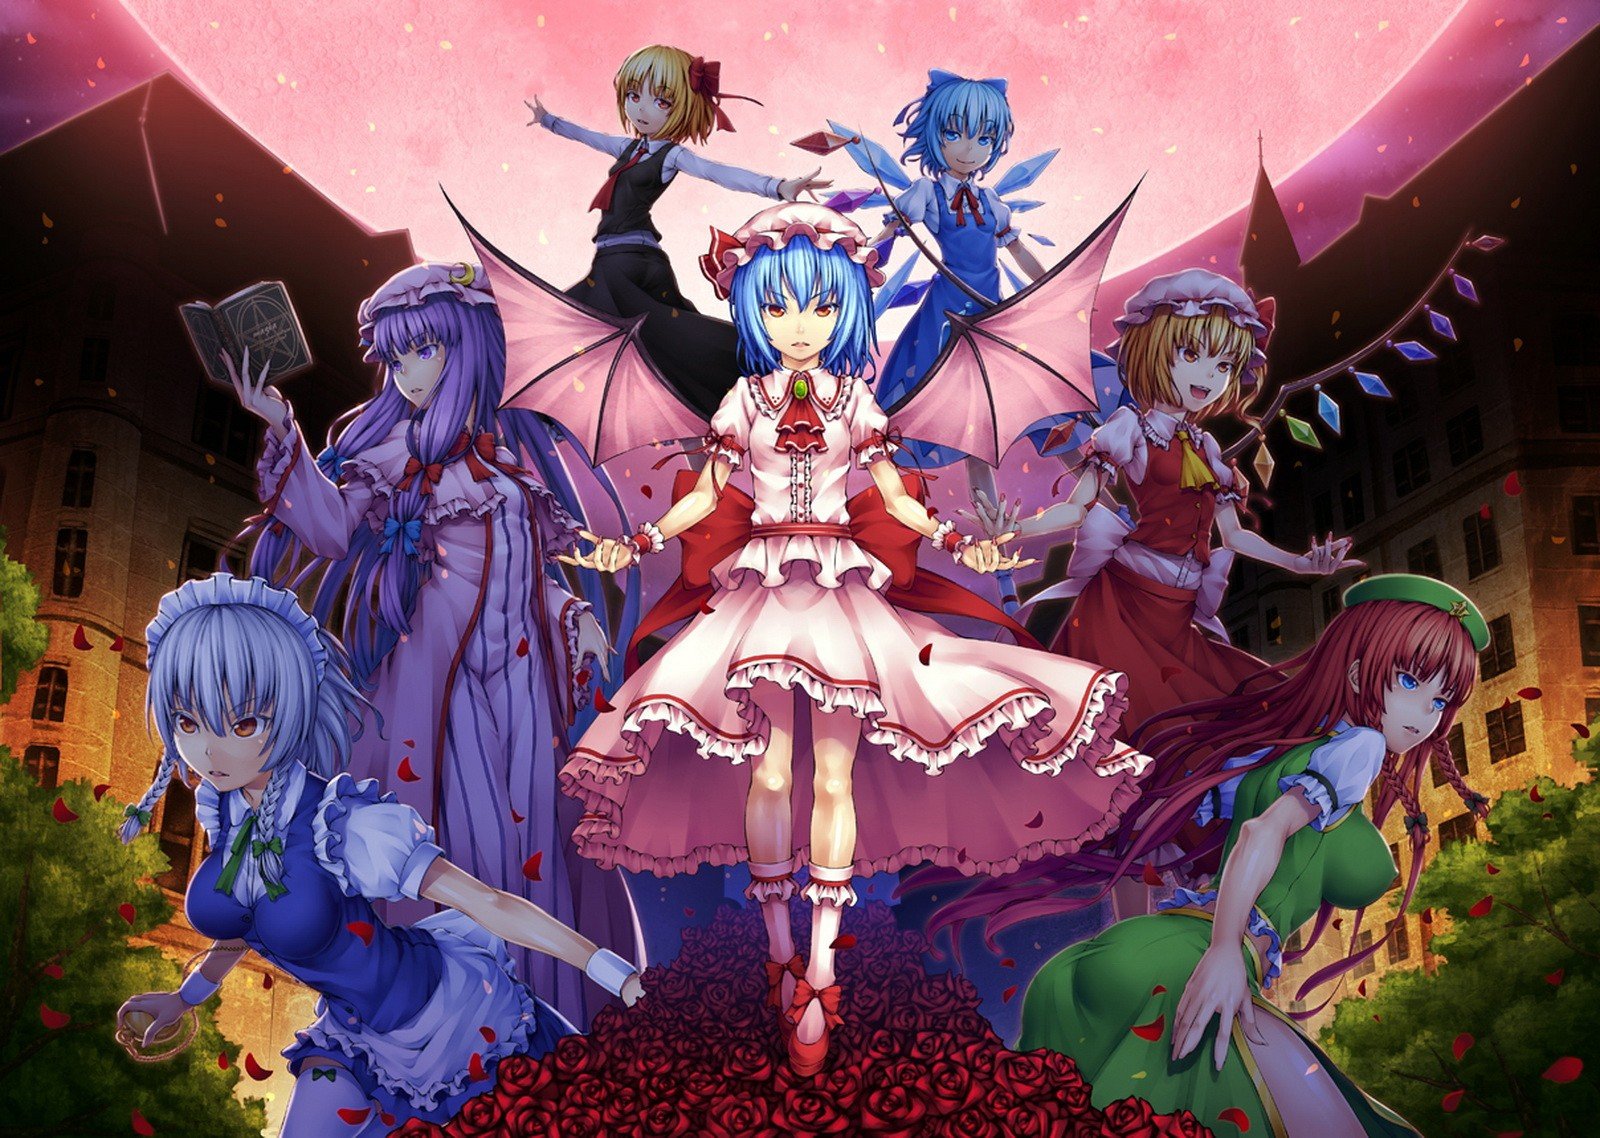 video, Games, Touhou, Wings, Maids, Cirno, Izayoi, Sakuya, Vampires, Flandre, Scarlet, Hong, Meiling, Patchouli, Knowledge, Rumia, Remilia, Scarlet, Embodiment, Of, Scarlet, Devil Wallpaper